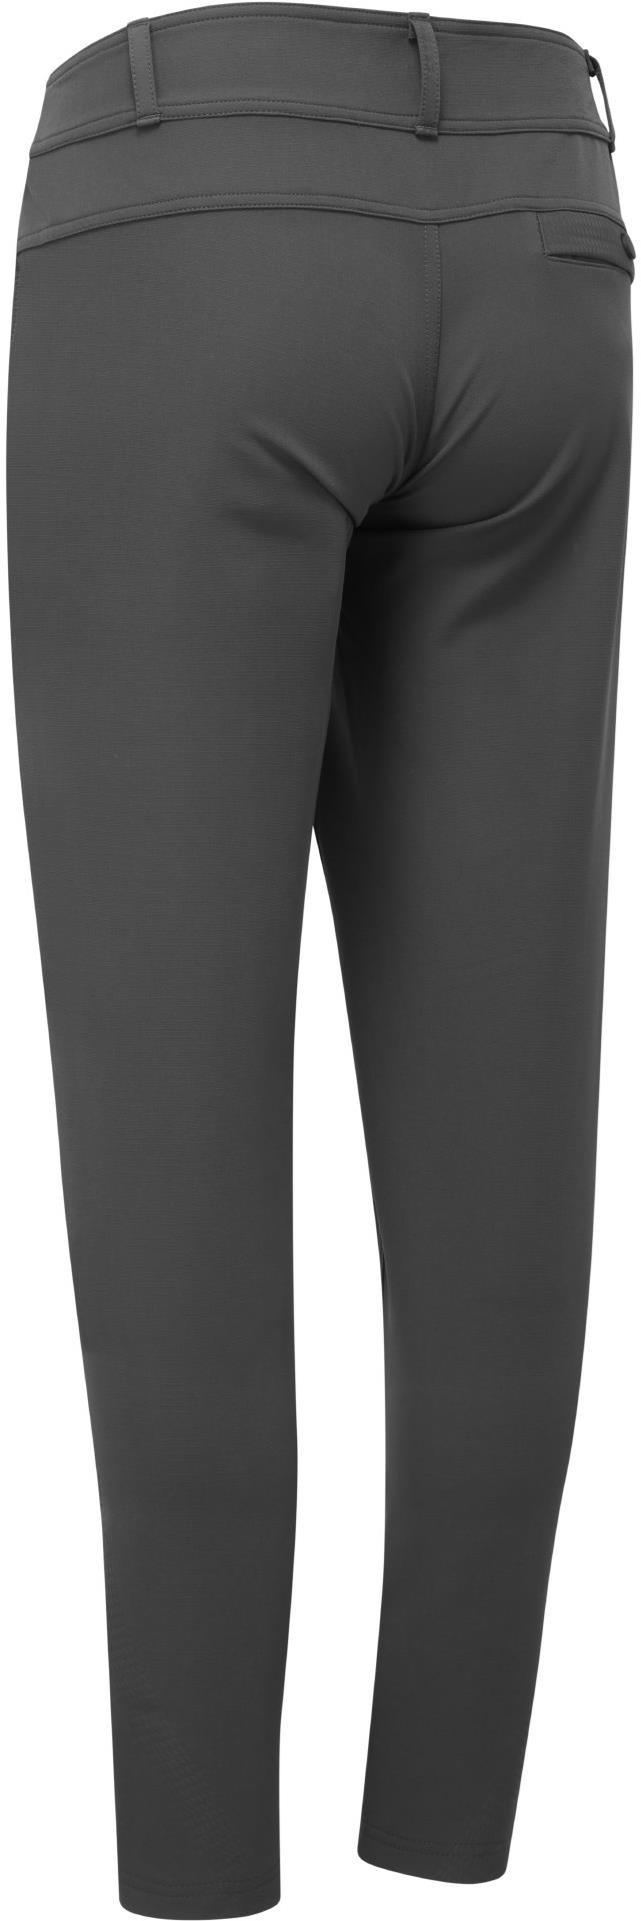 All Roads Repel Womens Trousers image 1